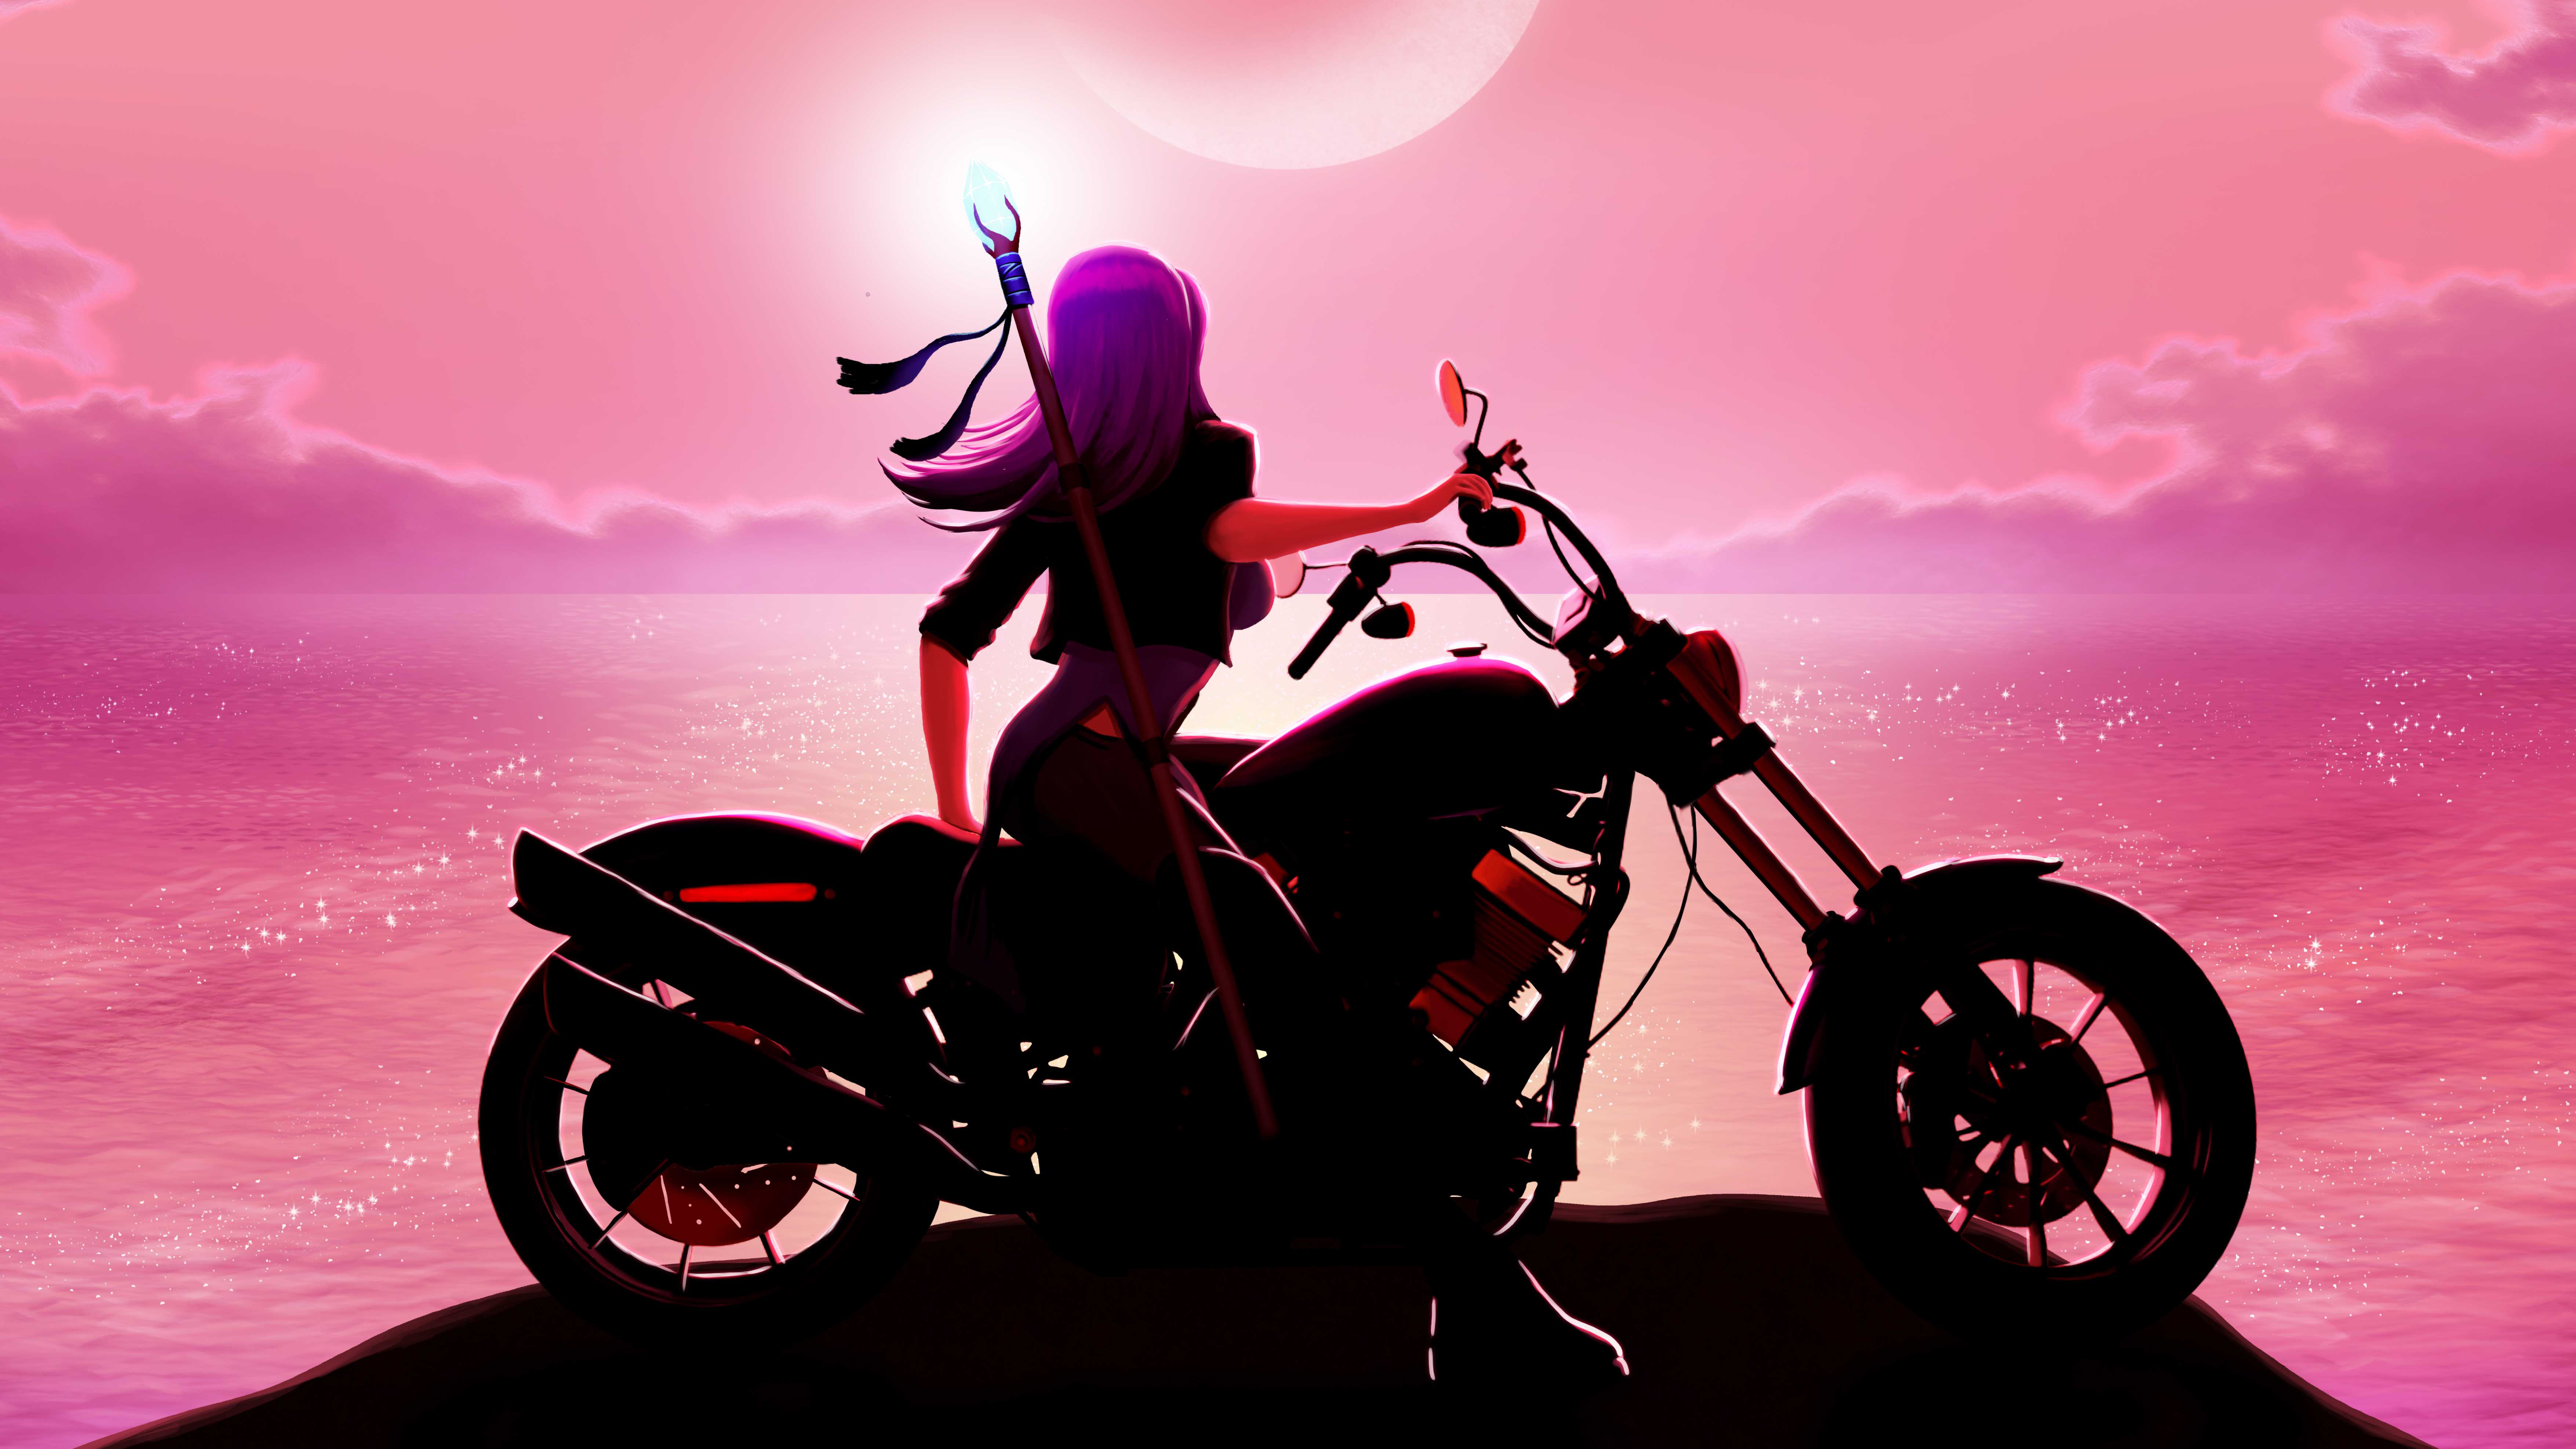 Girls and Motorcycles Wallpapers (77+ images inside)